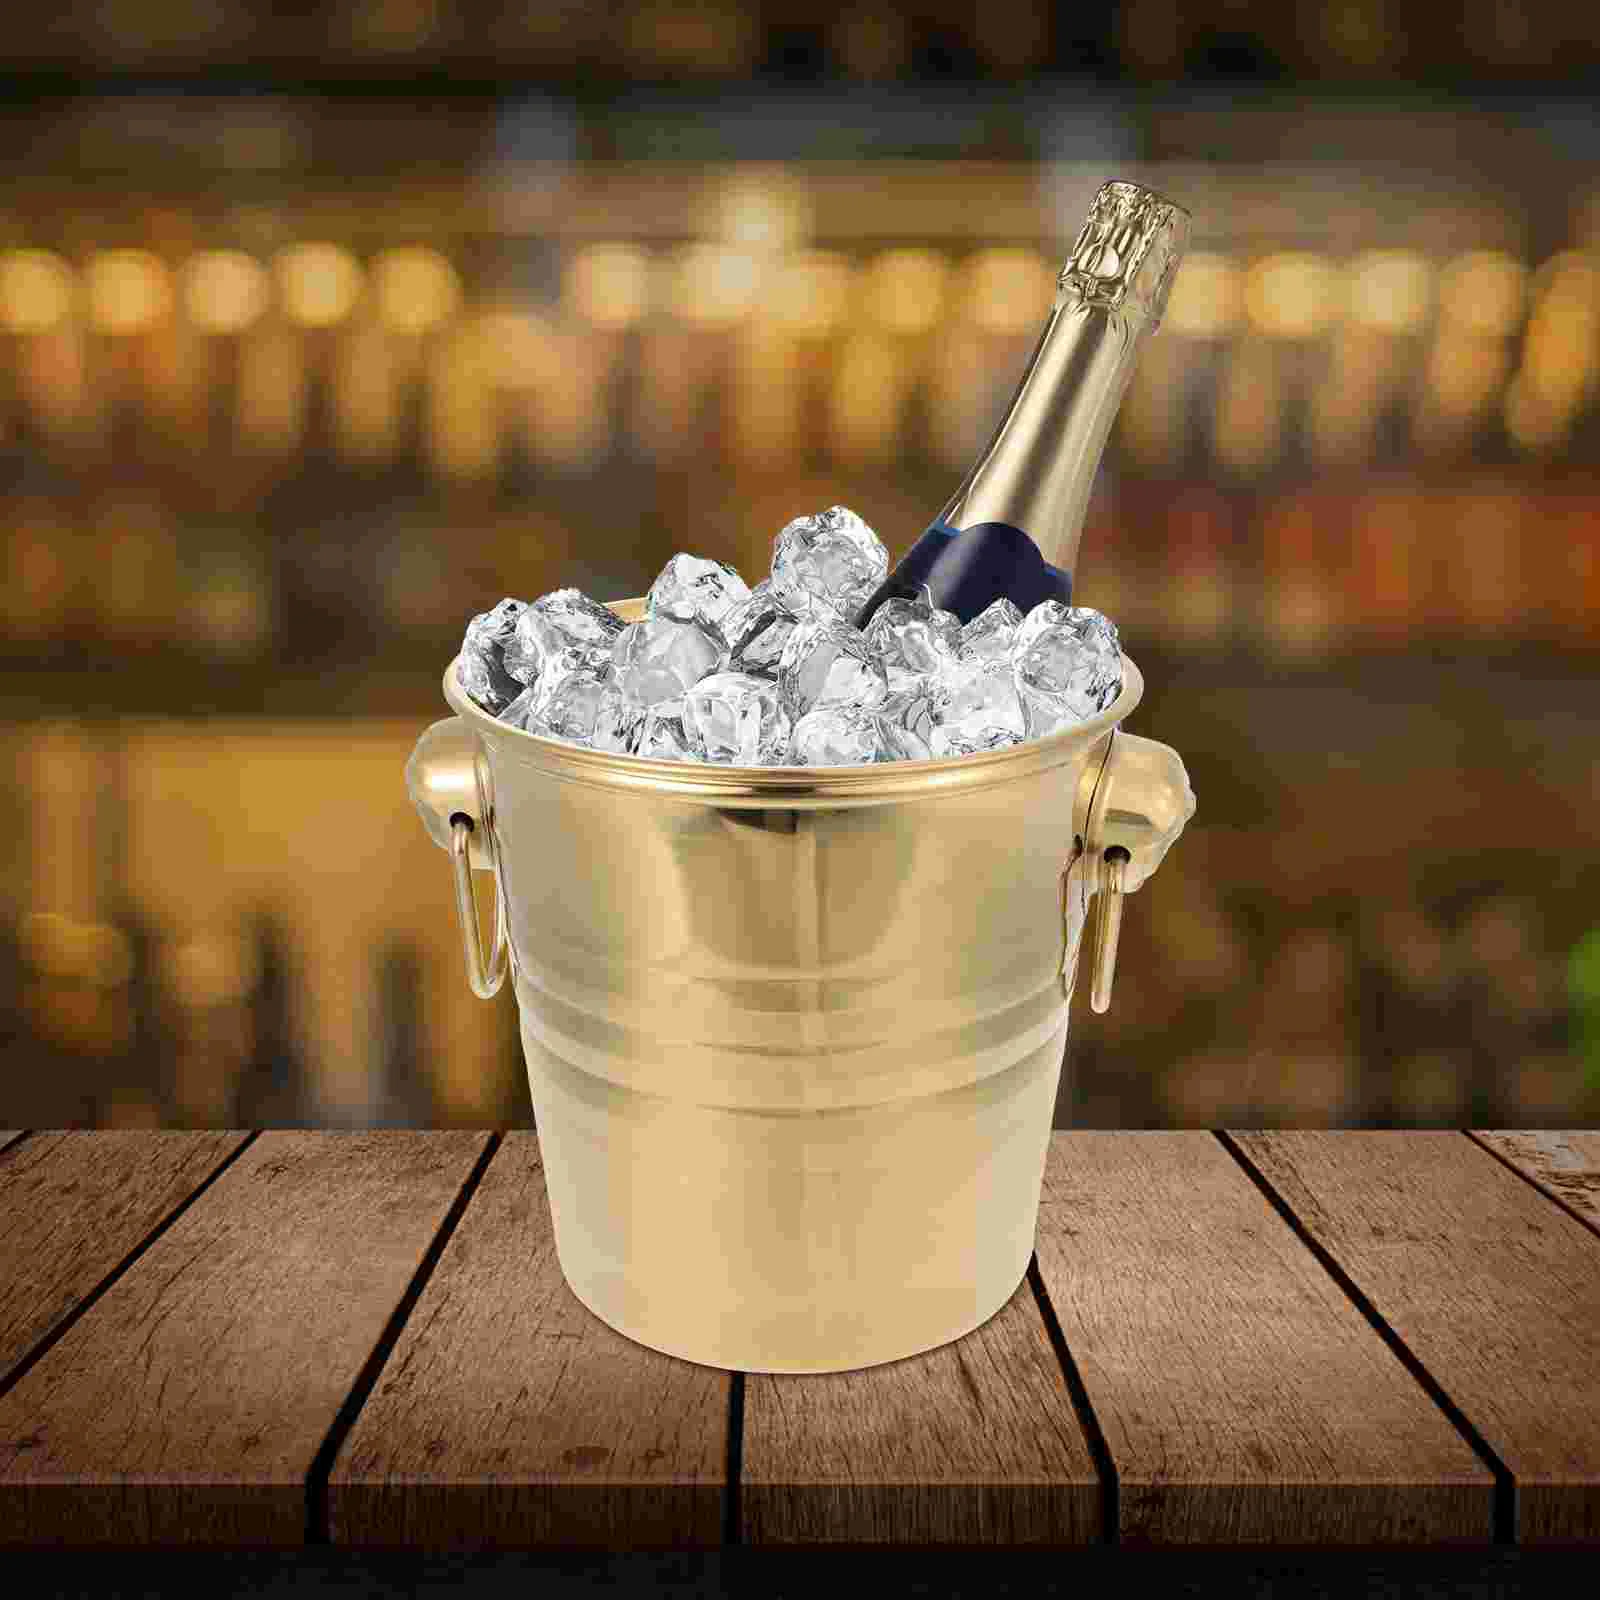 

Bucket Ice Champagne Buckets Chiller Metal Bar Tub Beverage Cooler Party Beer Cocktail Stainless Steel Insulated Large Drink